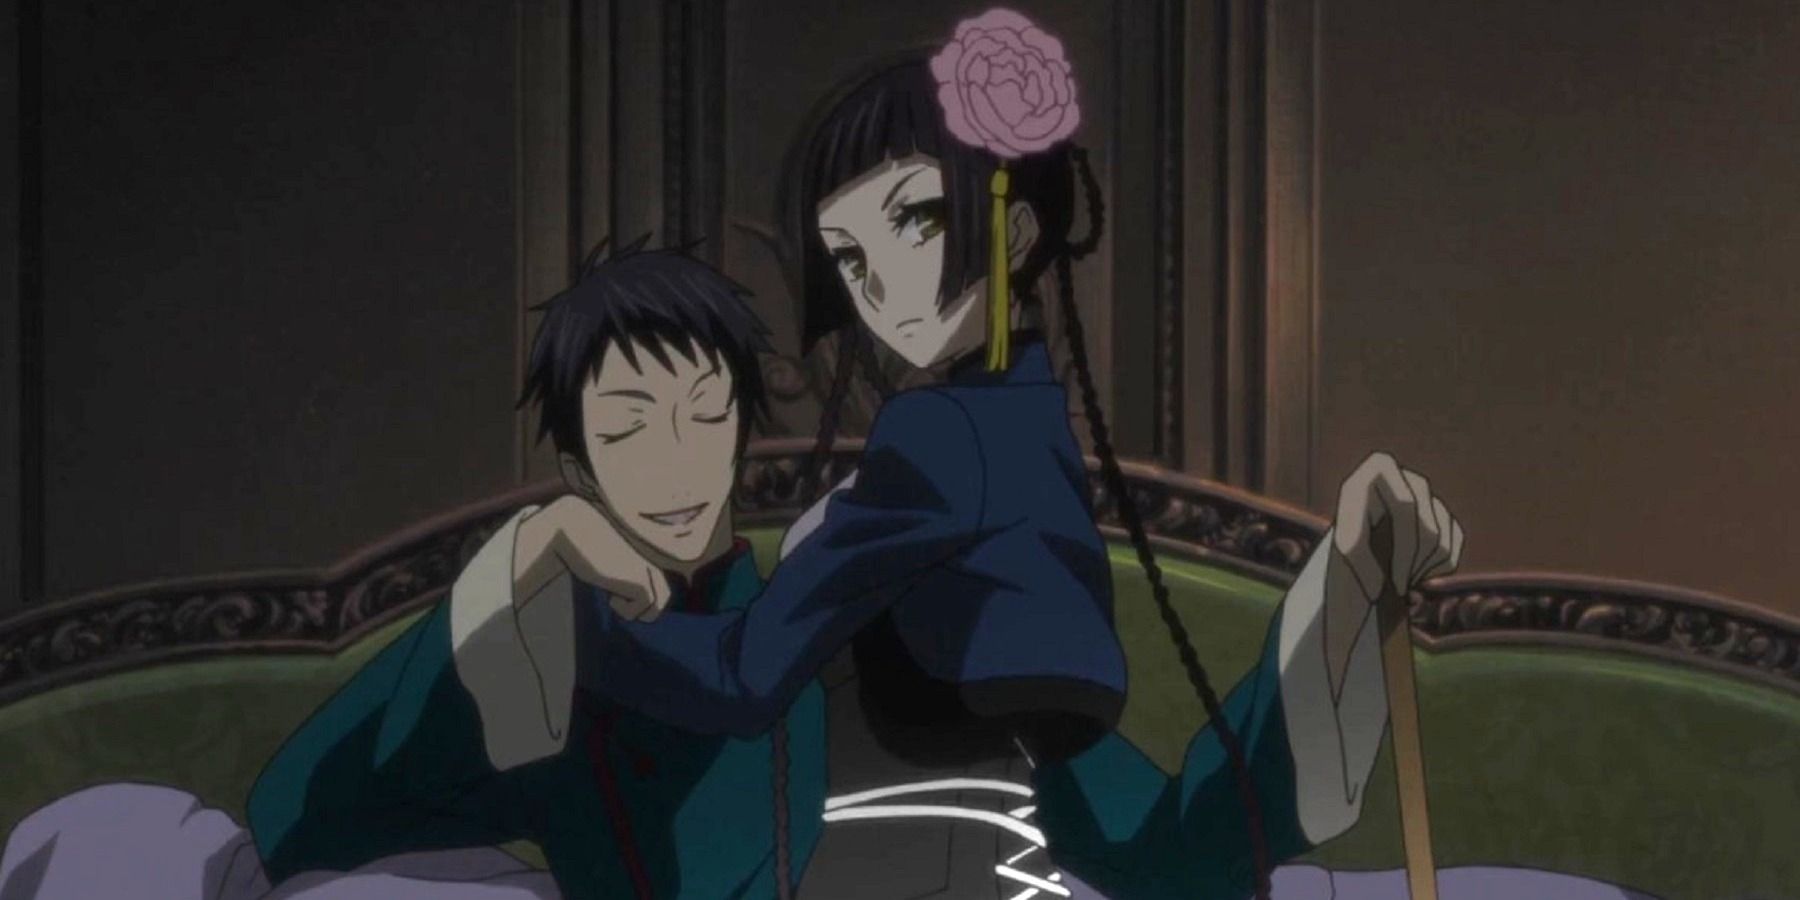 Ran Mao and Lau in Black Butler